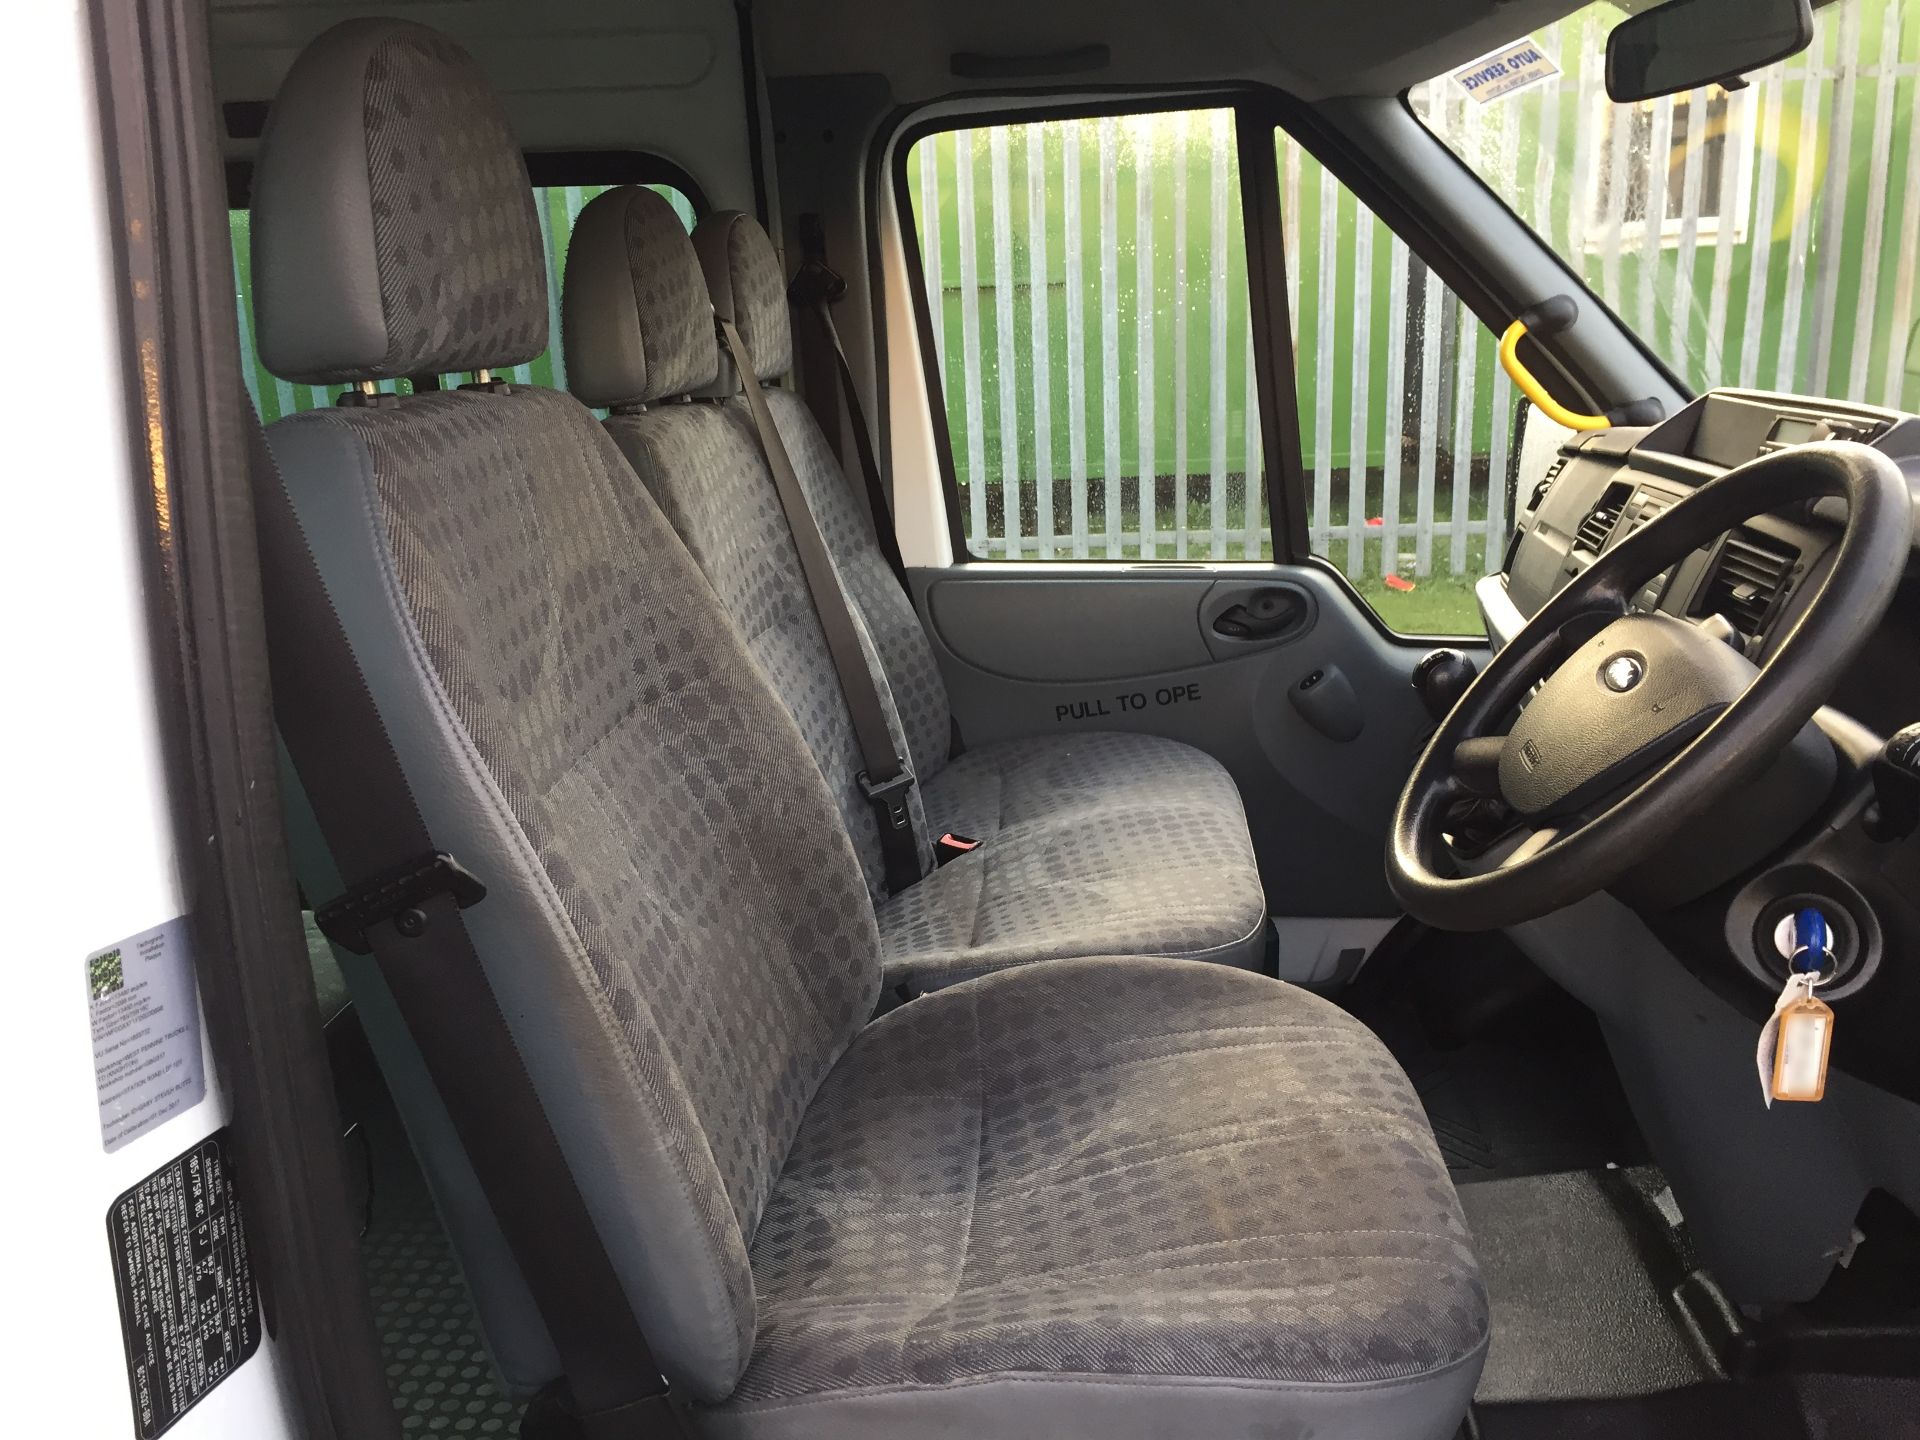 2010 Ford Transit 430 EL 17 Seater Minibus C.O.I.F 135 PS 2.4 - CL505 - Location: Corby, - Image 6 of 10